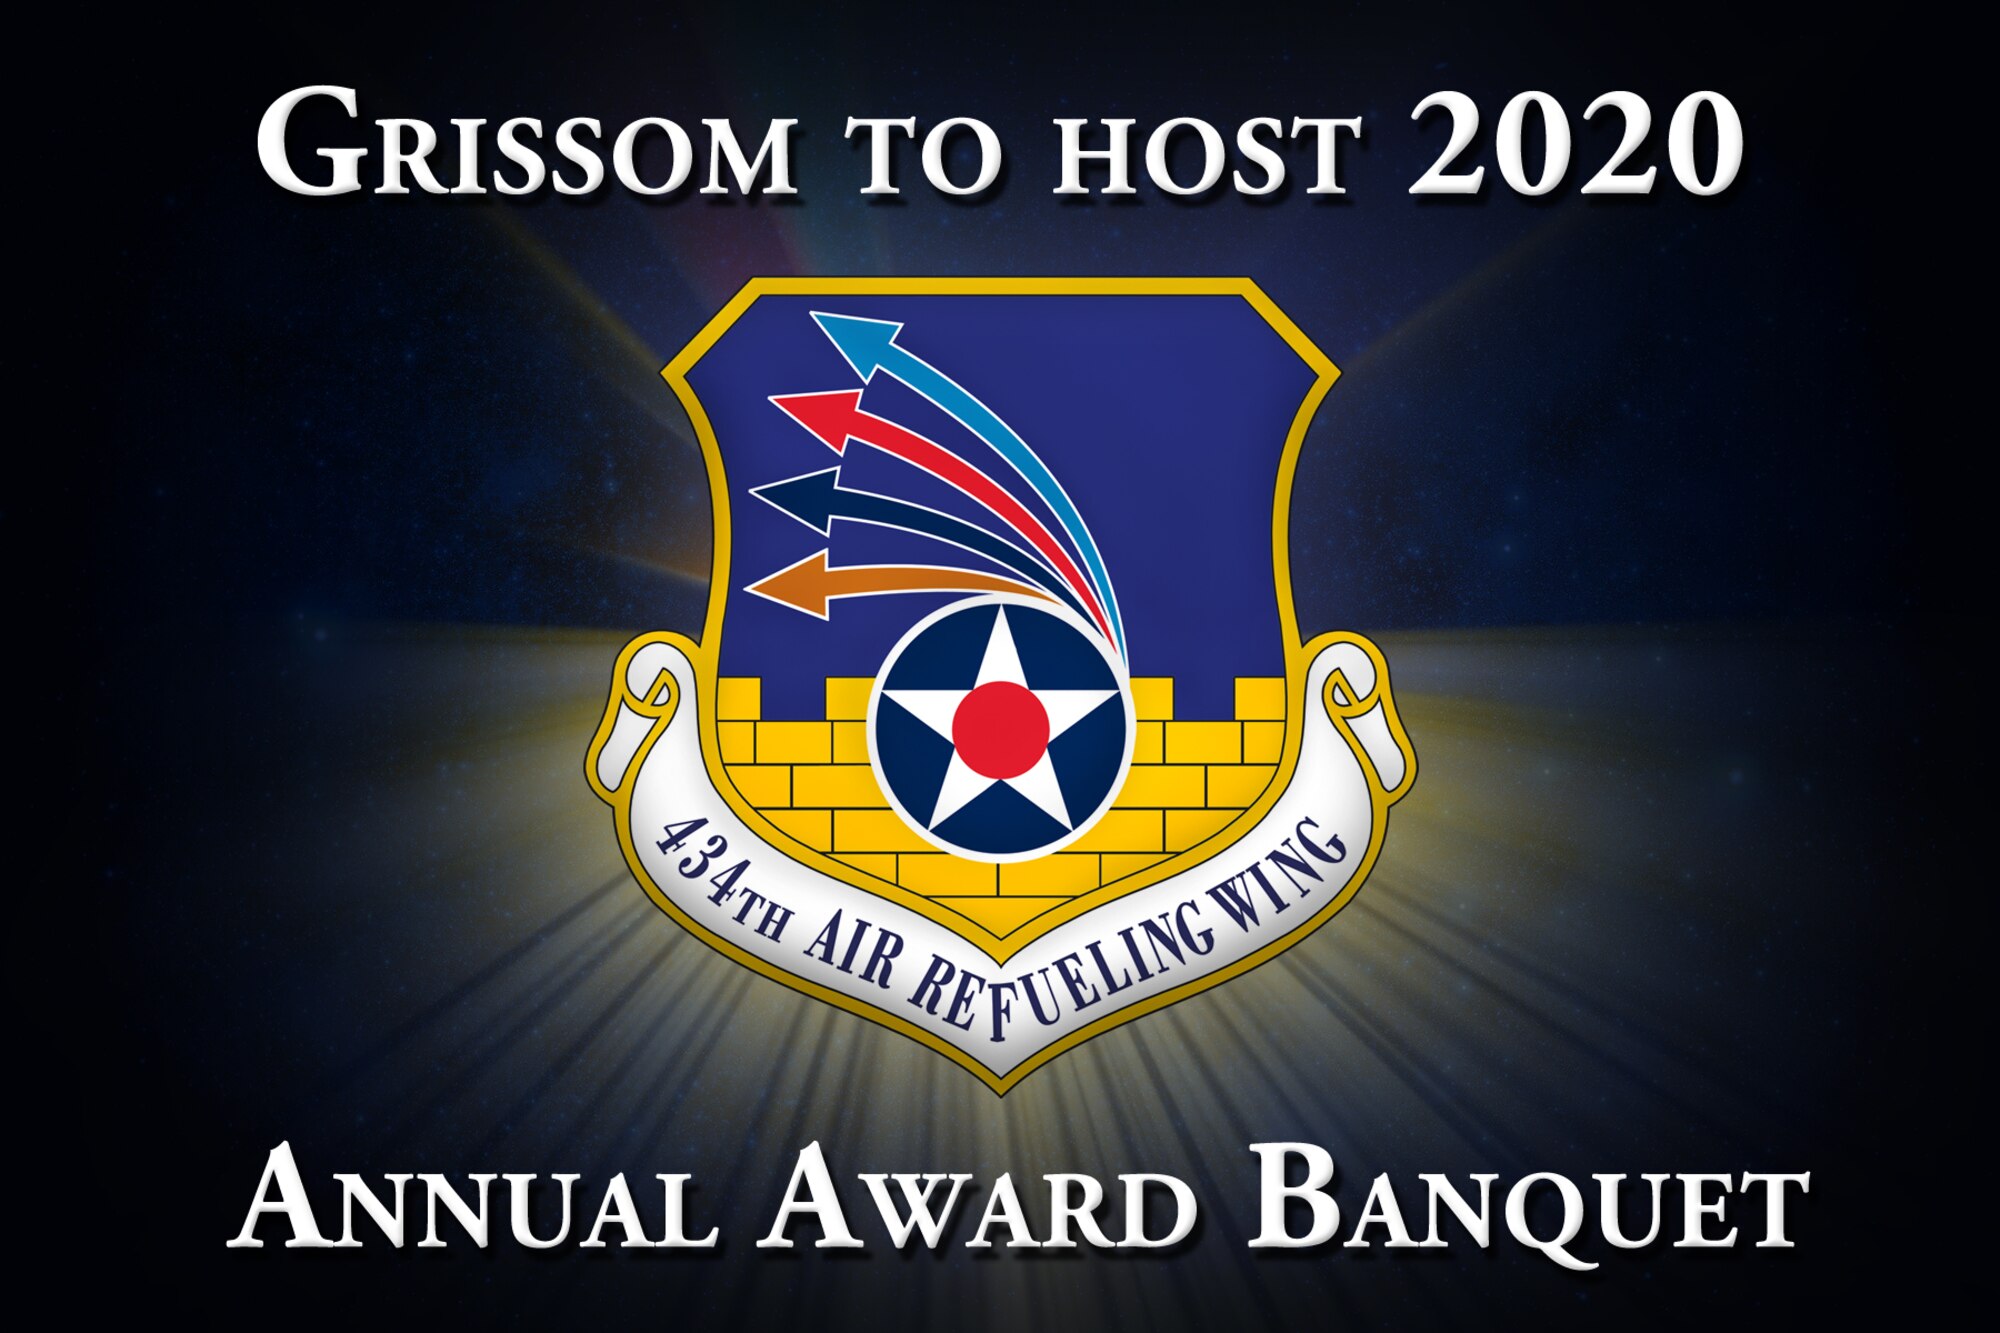 Grissom nominees, Airmen, friends and family will gather once again at the dining facility here March 7, 2020 to honor Airmen during the 434th Air Refueling Wing Annual Award Banquet. (U.S. Air Force Graphic)